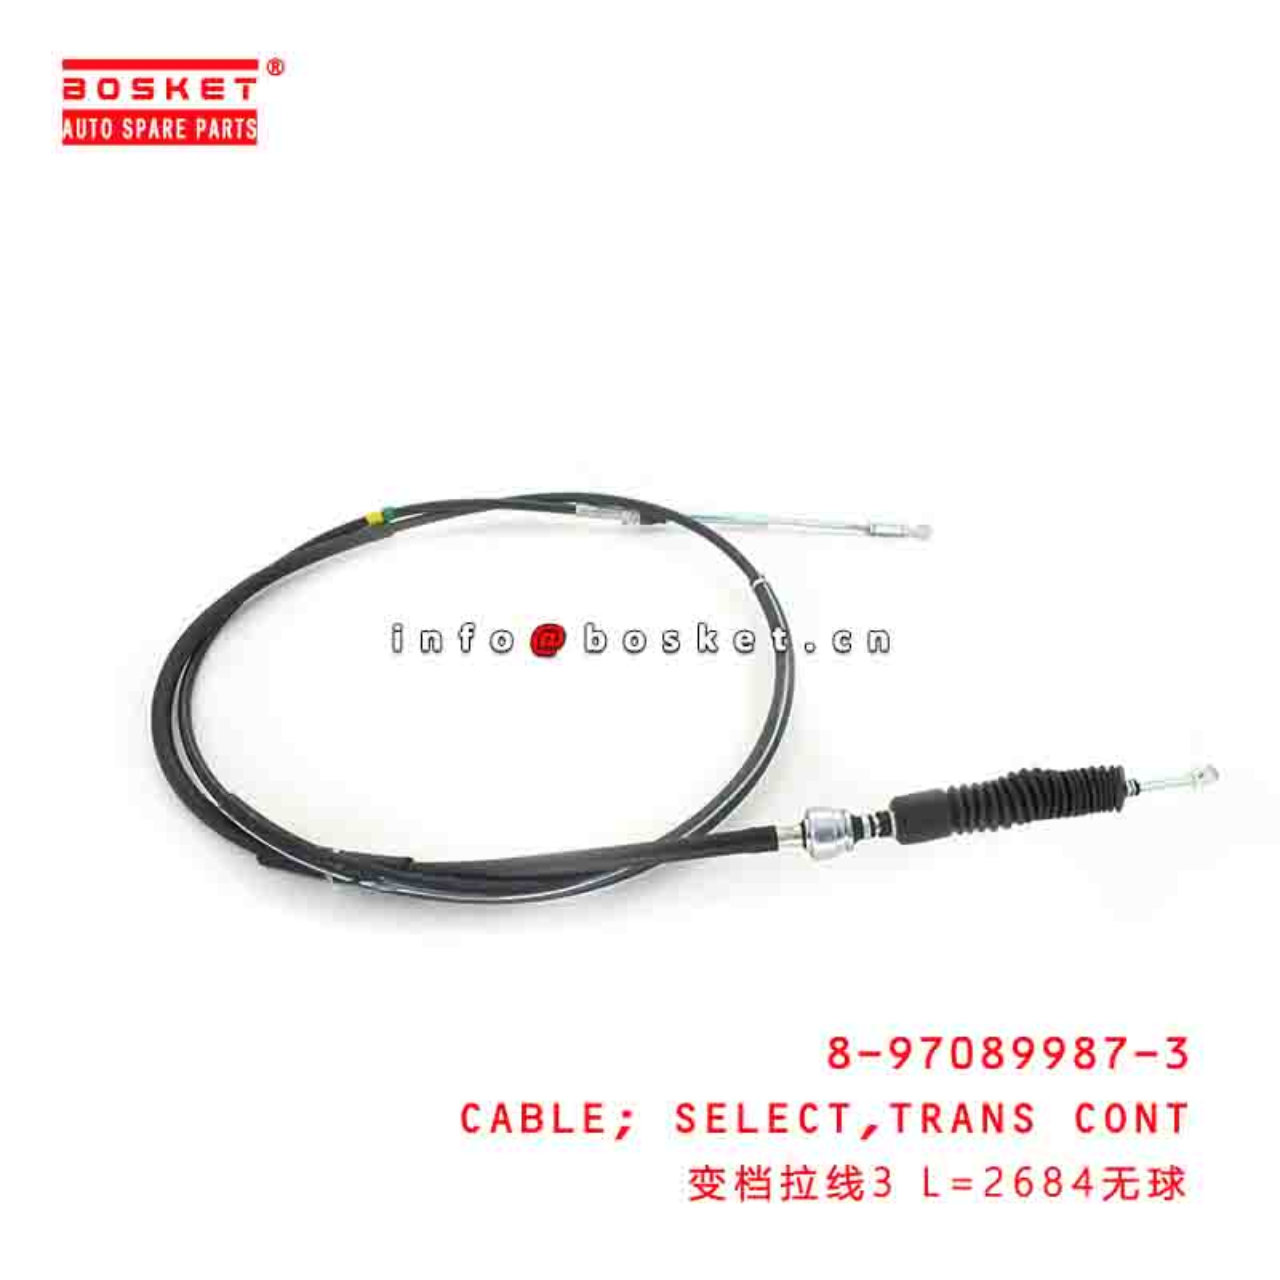 8-97089987-3 8970899873 TRANSMISSION CONTROL SELECT CABLE 3 L=2684 Suitable FOR ISUZU NKR55 4JB1 MSB